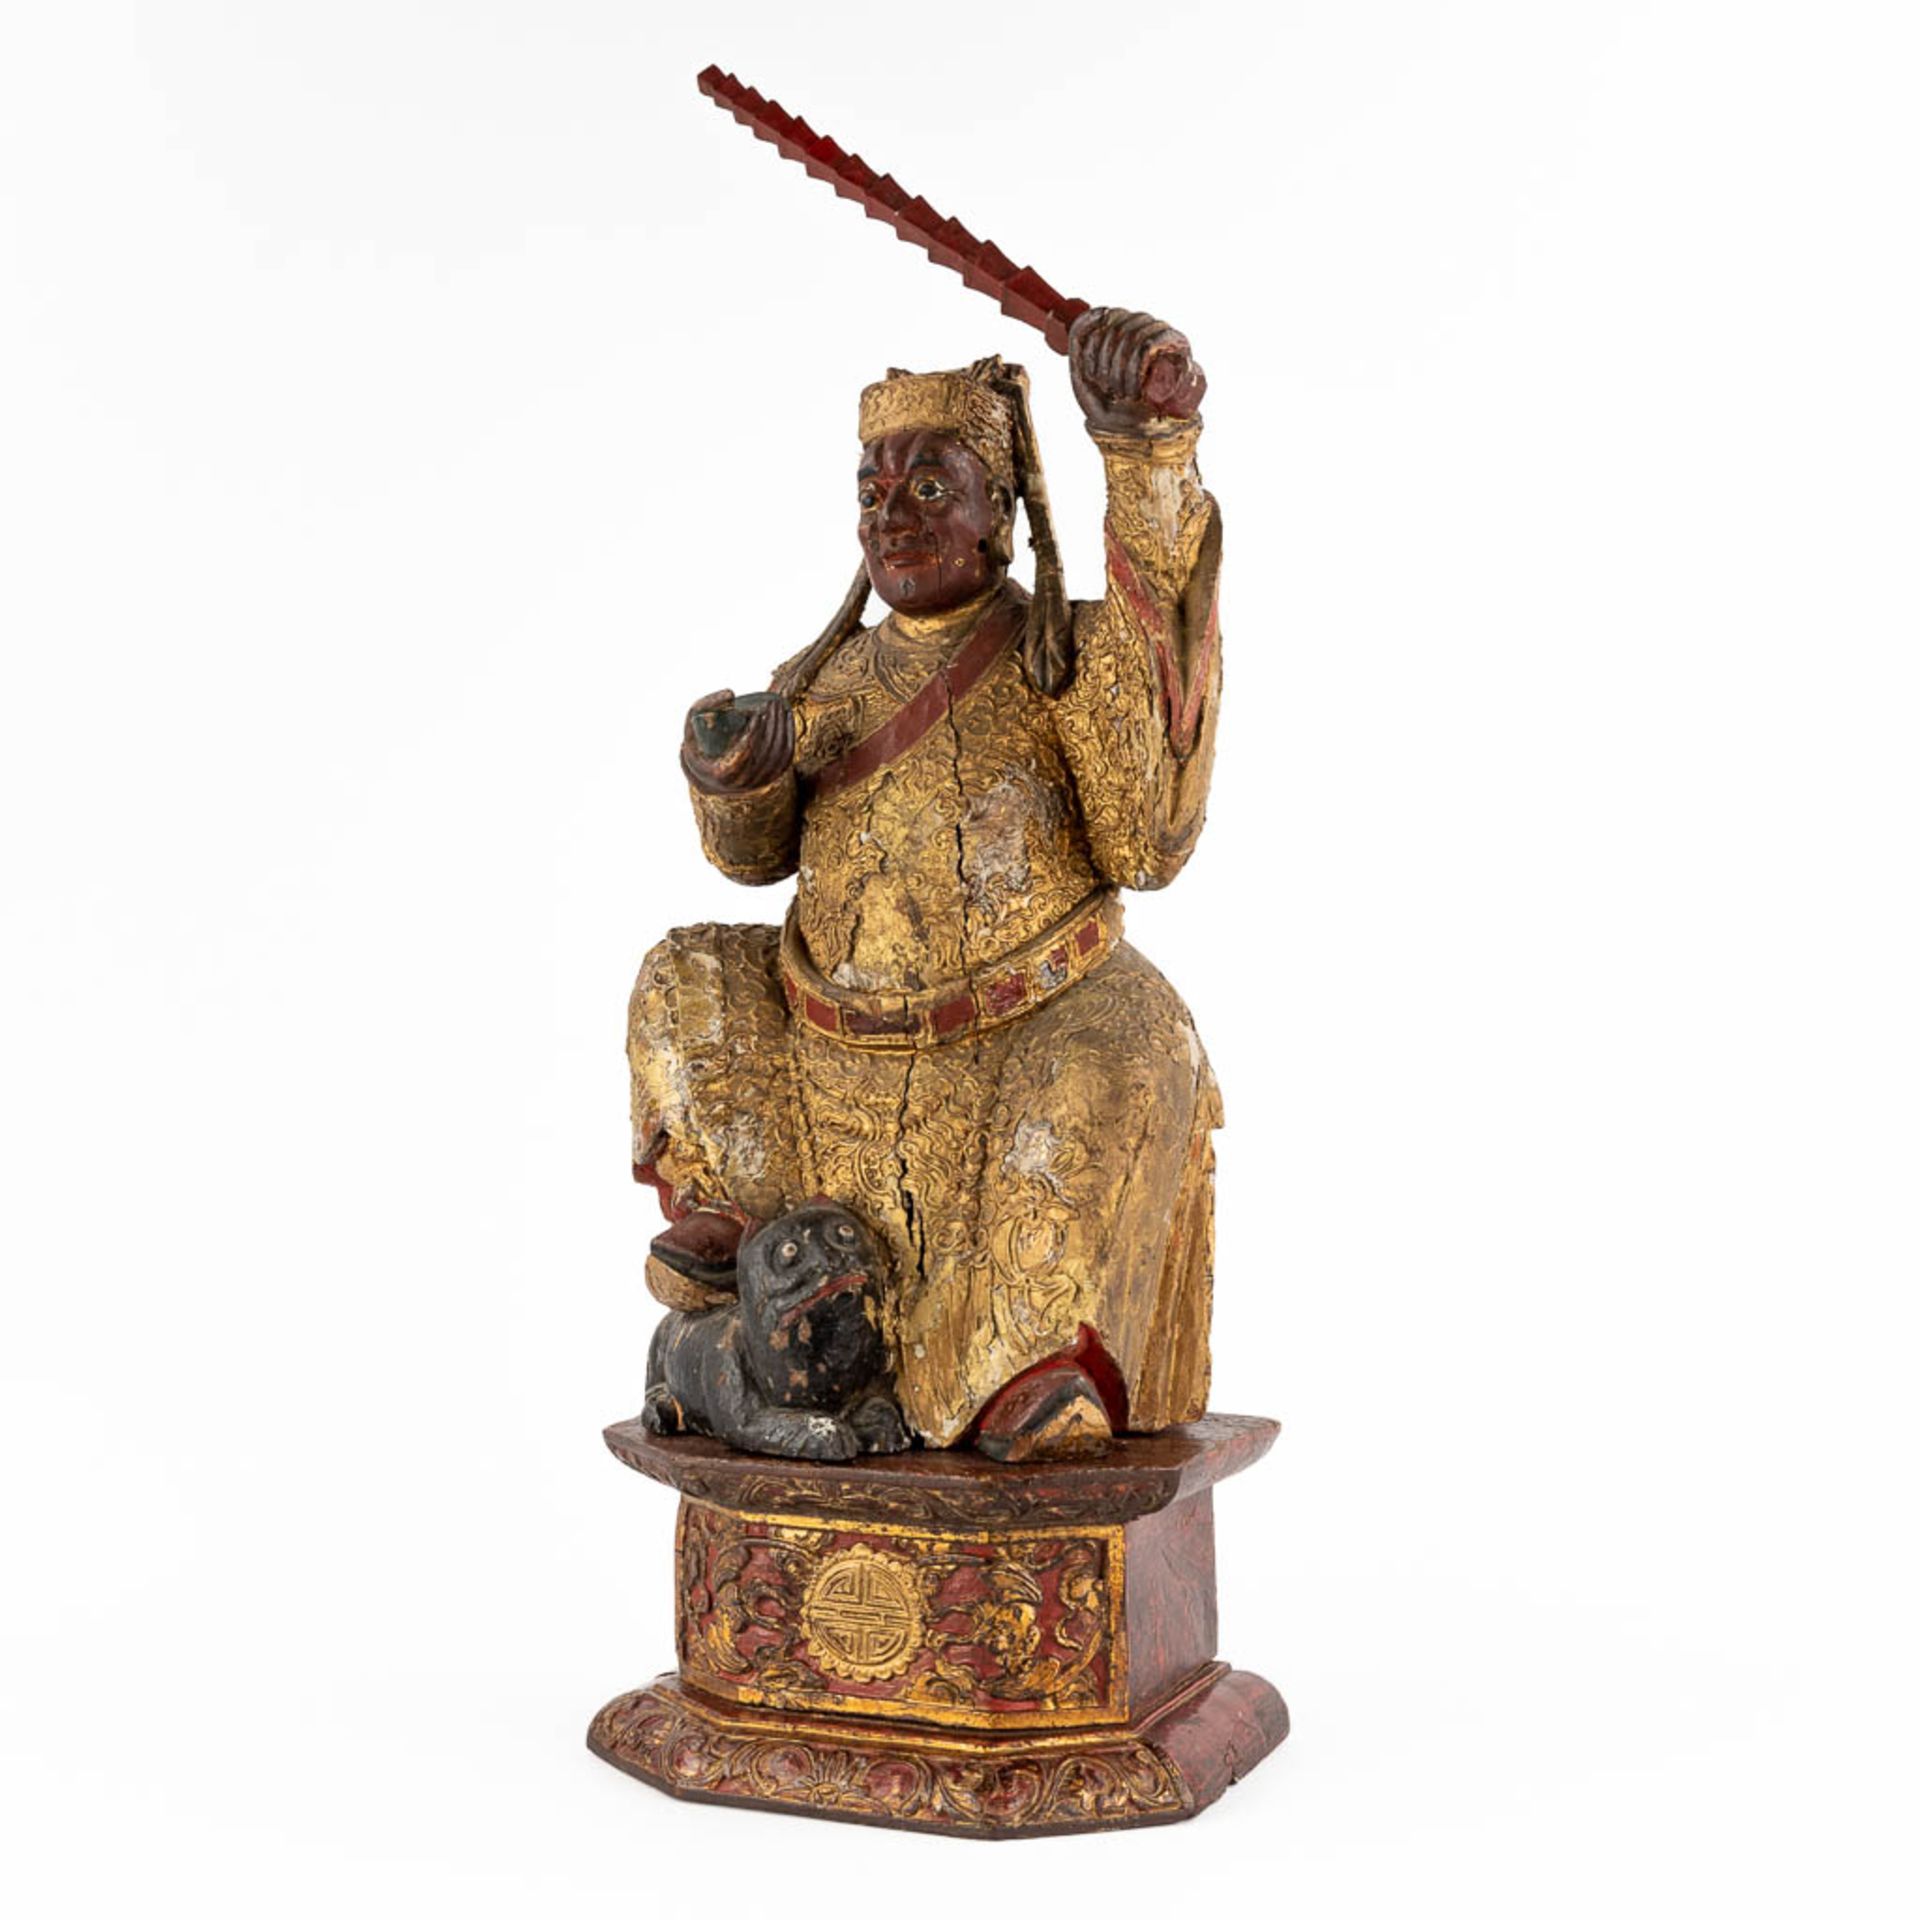 A Chinese antique figurine of a warrior, gilt and polychrome wood sculpture, 18th/19th C. (D:20 x W: - Bild 3 aus 19